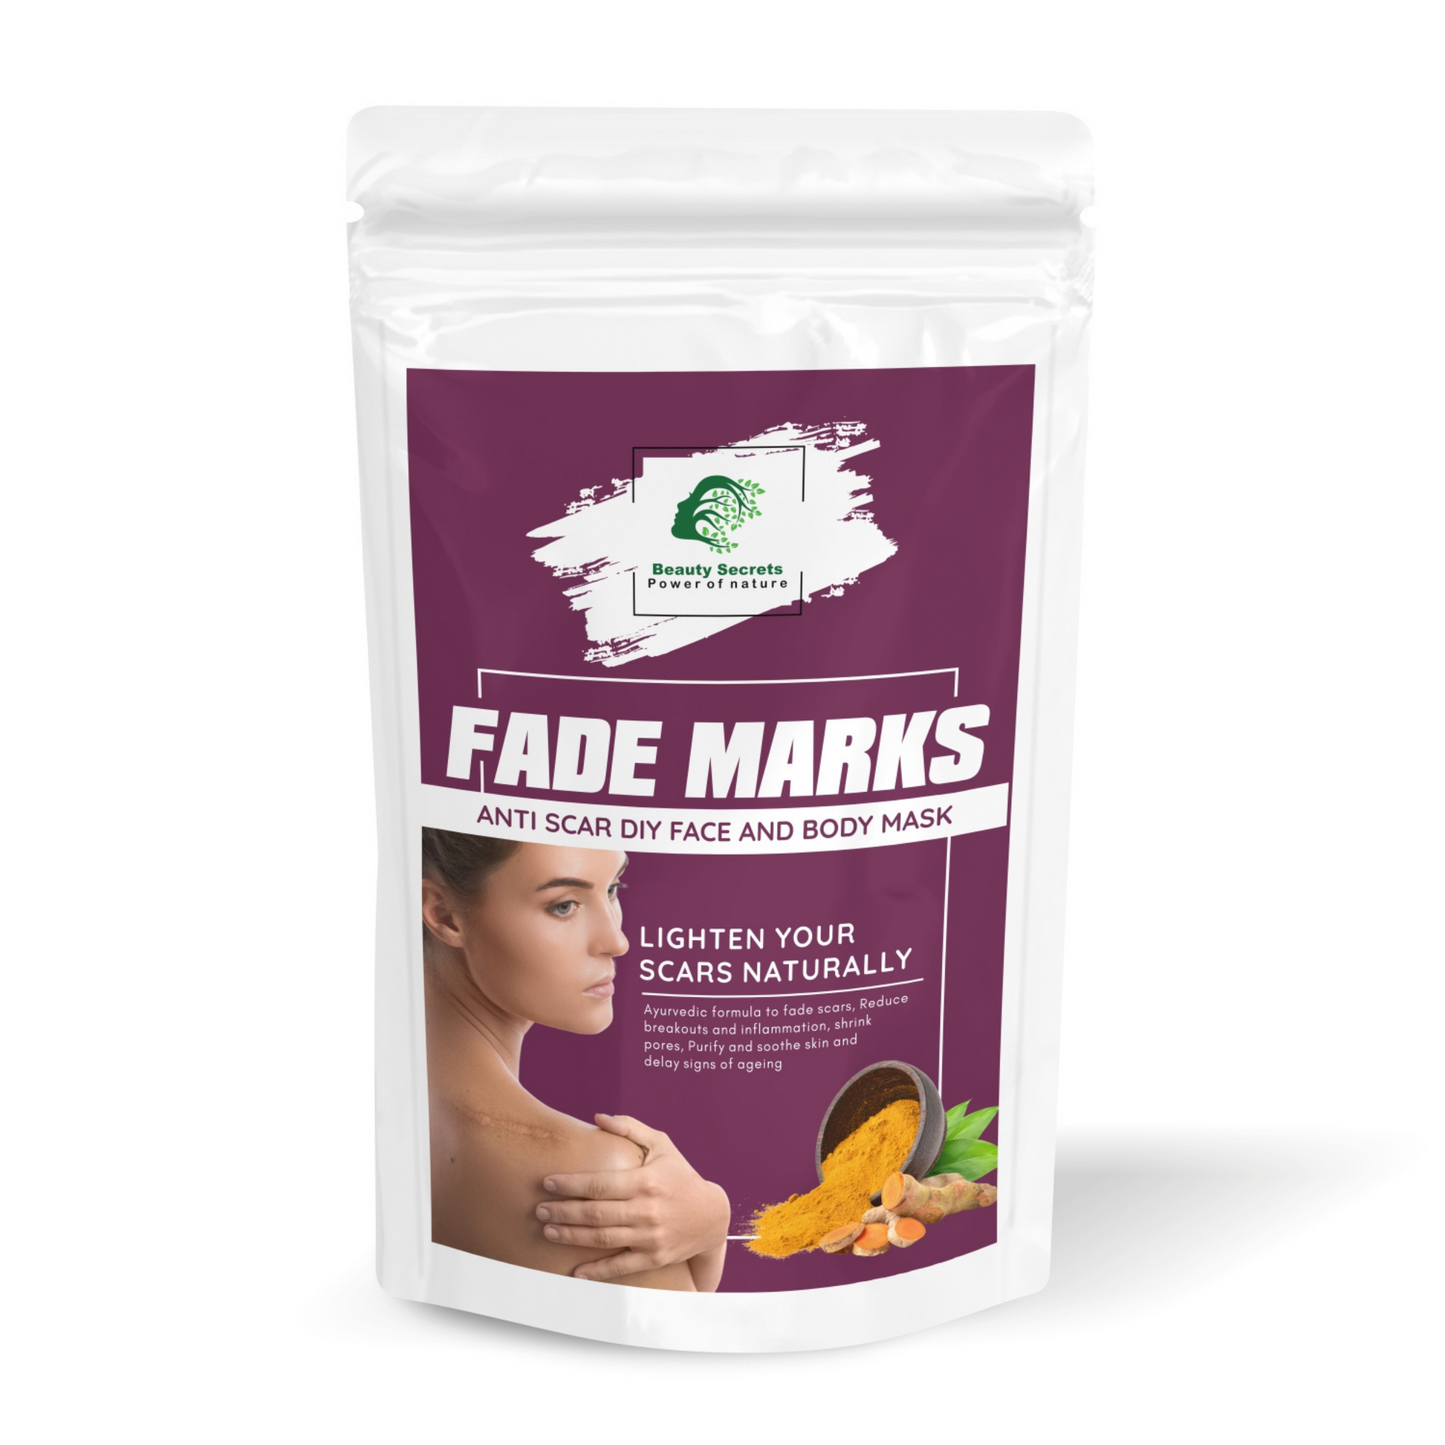 FADE MARKS : LIGHTEN YOUR SCARS NATURALLY  ANTI SCAR DIY FACE AND BODY MASK